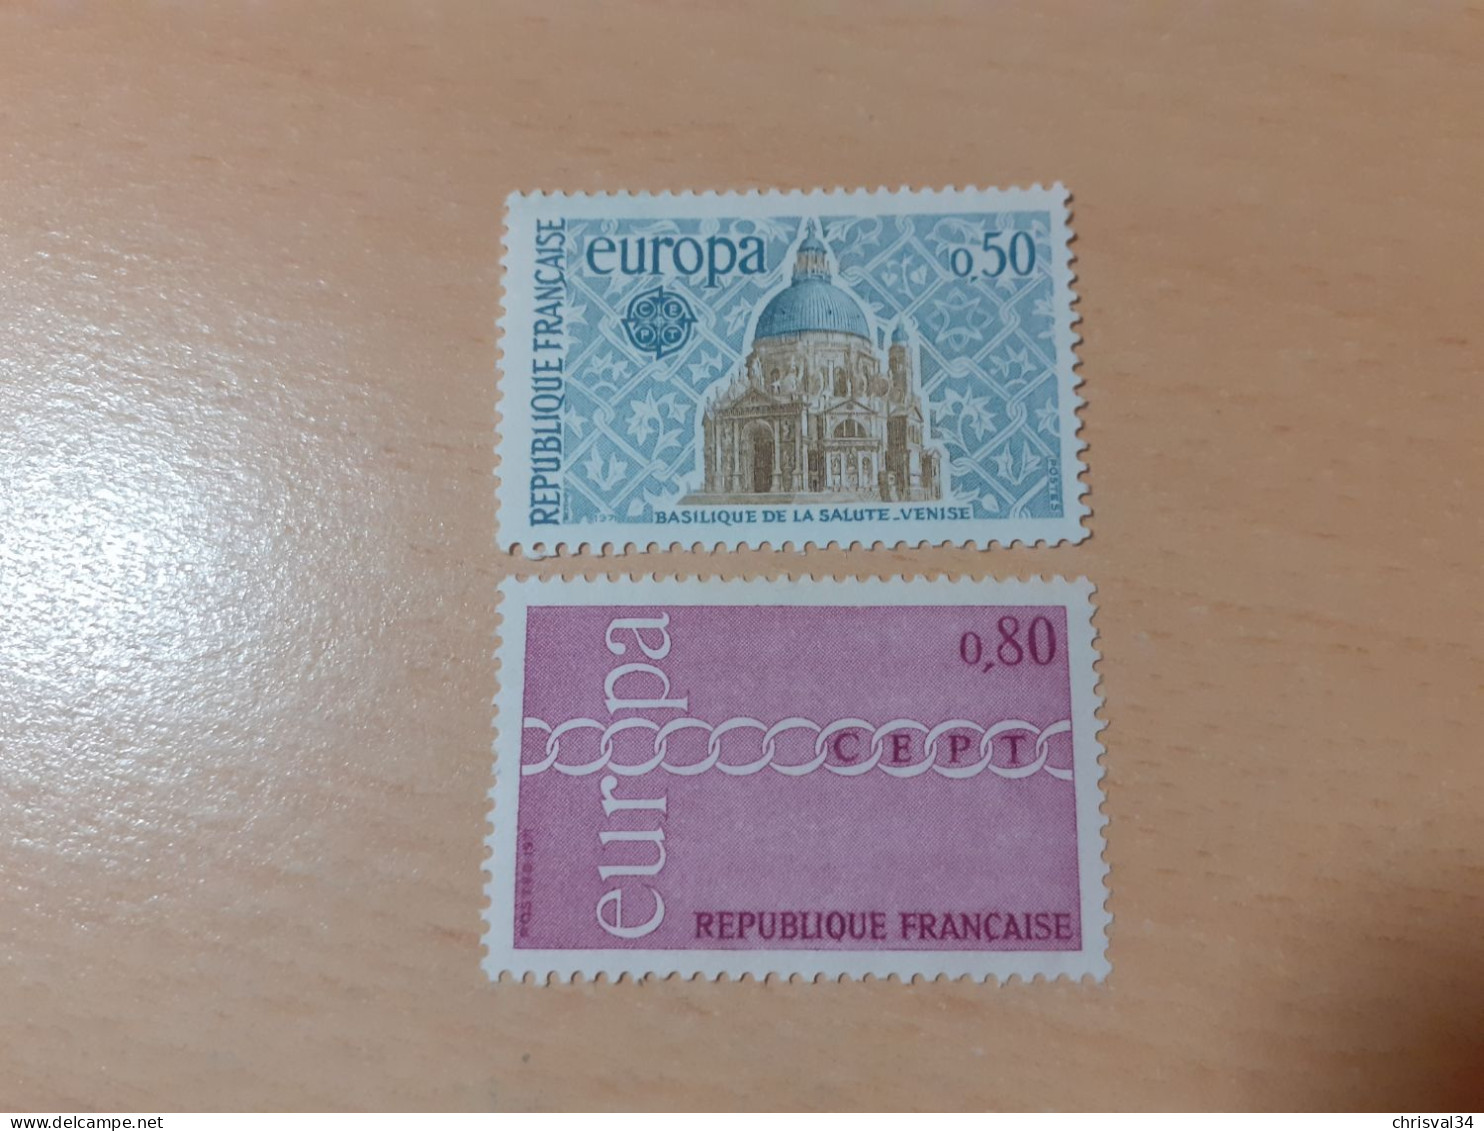 TIMBRES   FRANCE   EUROPA   1971   N  1676  /  1677   COTE  1,30  EUROS   NEUFS  LUXE** - 1971